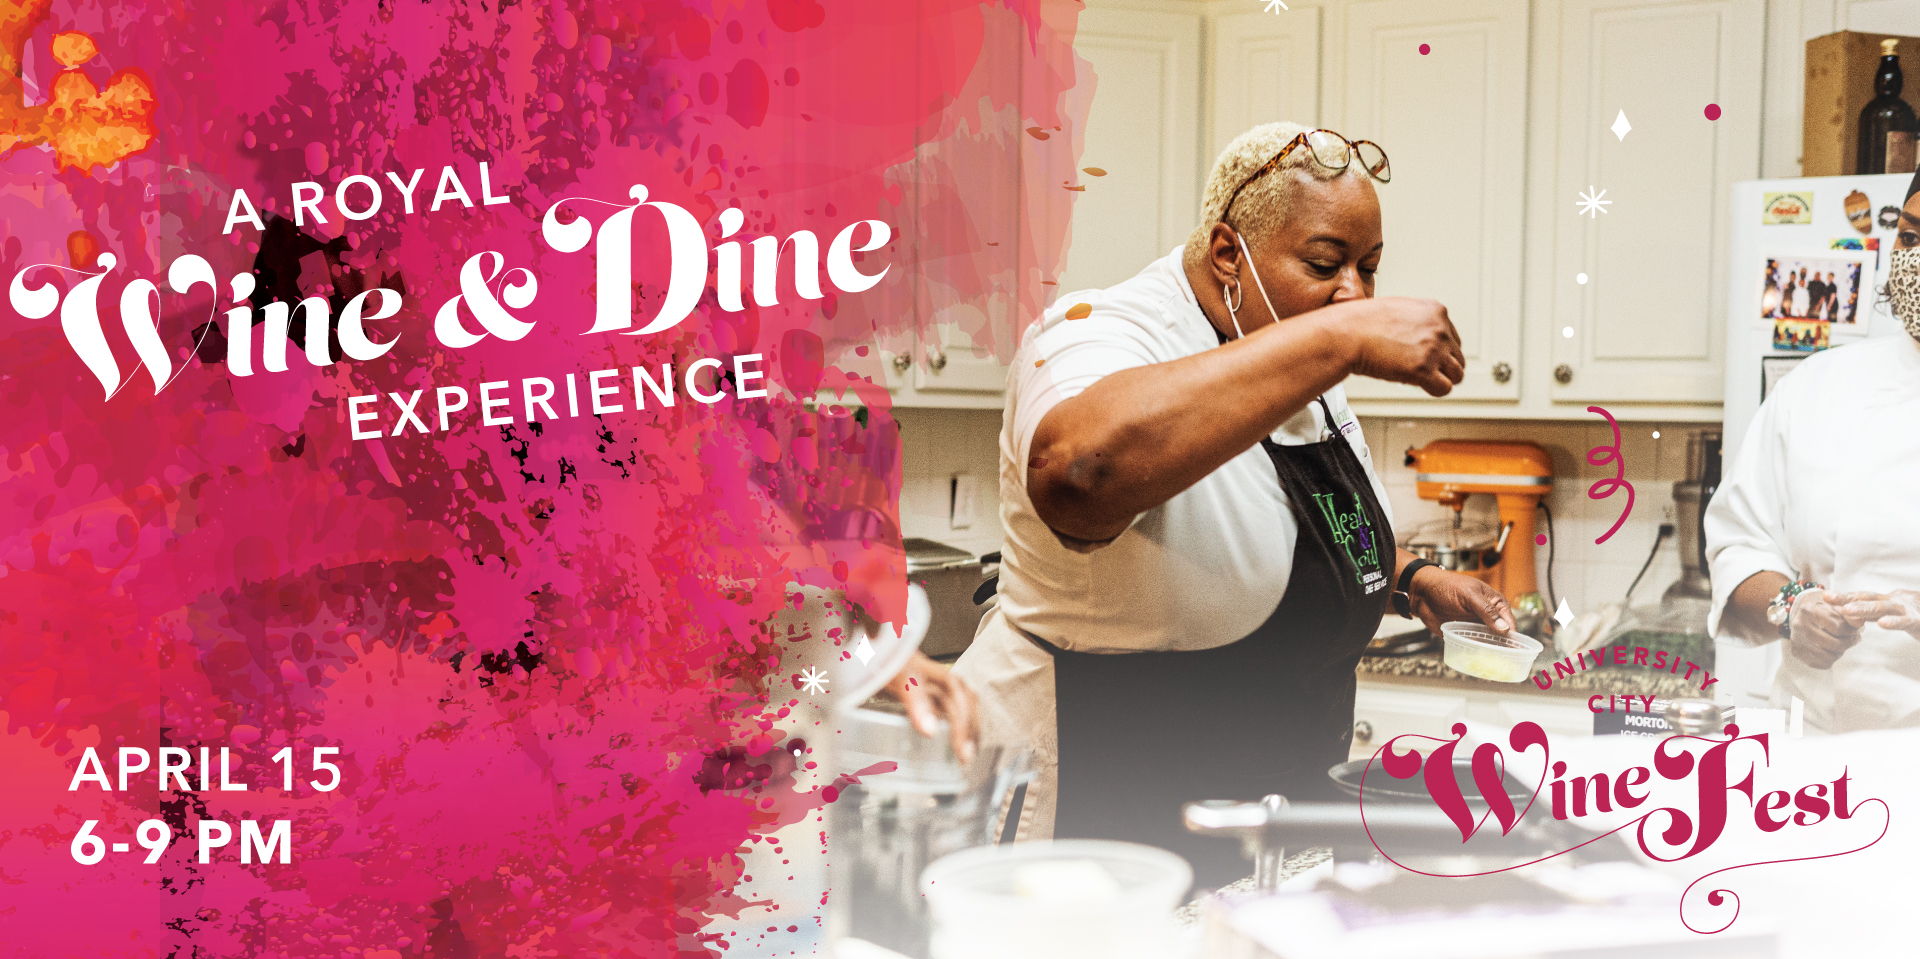 Royal Wine and Dine Experience  promotional image